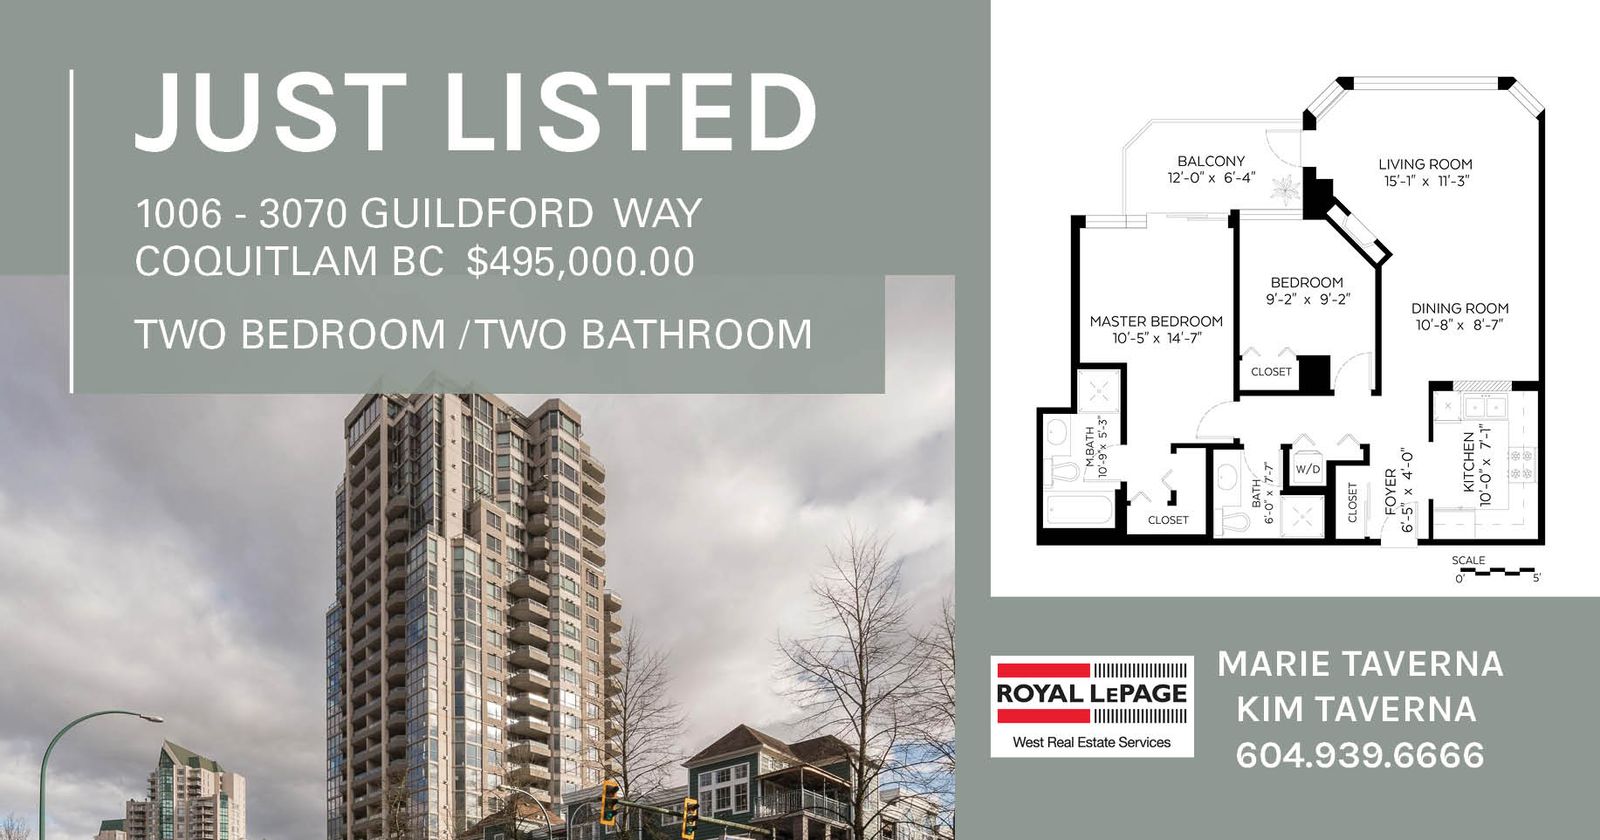 Just Listed 1006 - 3070 Guildford Way Coquitlam BC